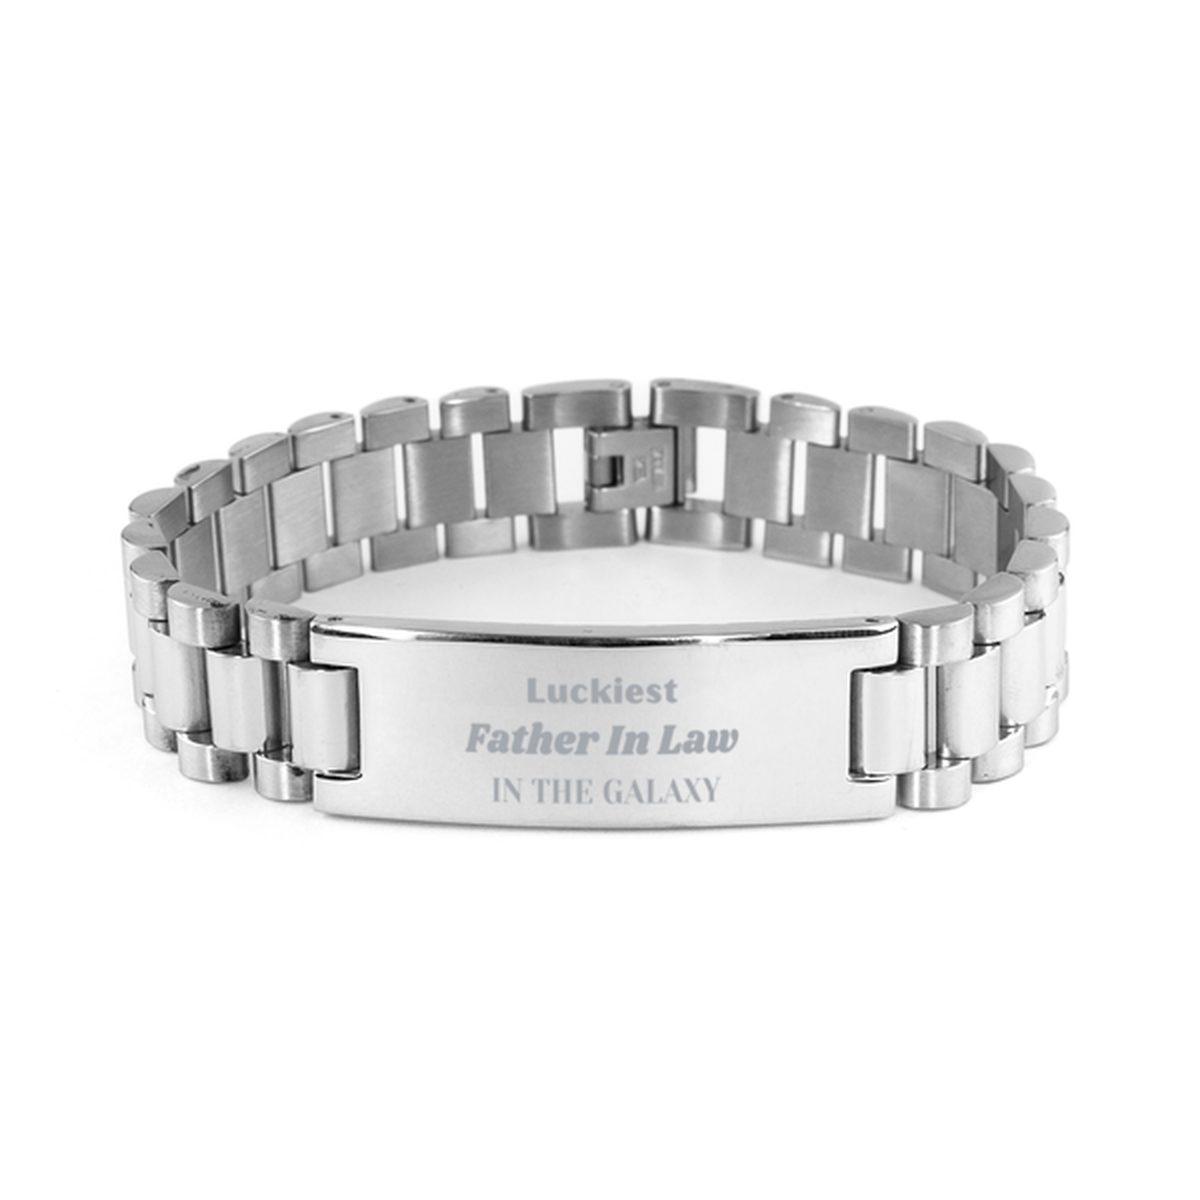 Luckiest Father In Law in the Galaxy, To My Father In Law Engraved Gifts, Christmas Father In Law Ladder Stainless Steel Bracelet Gifts, X-mas Birthday Unique Gifts For Father In Law Men Women